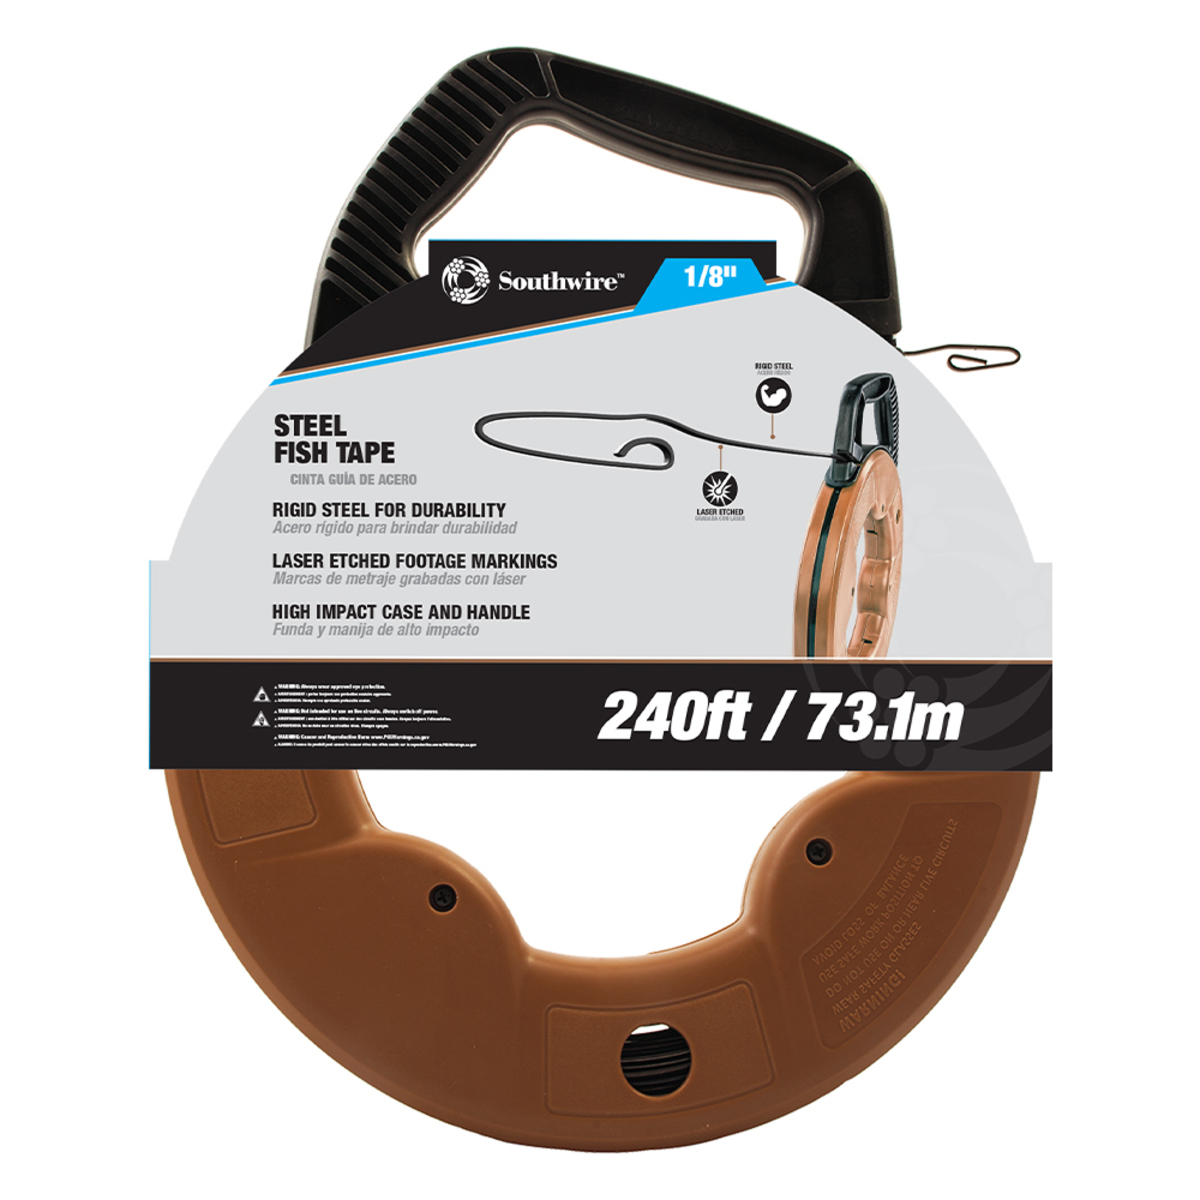 Low Voltage Fish Tape and Rod a Longs